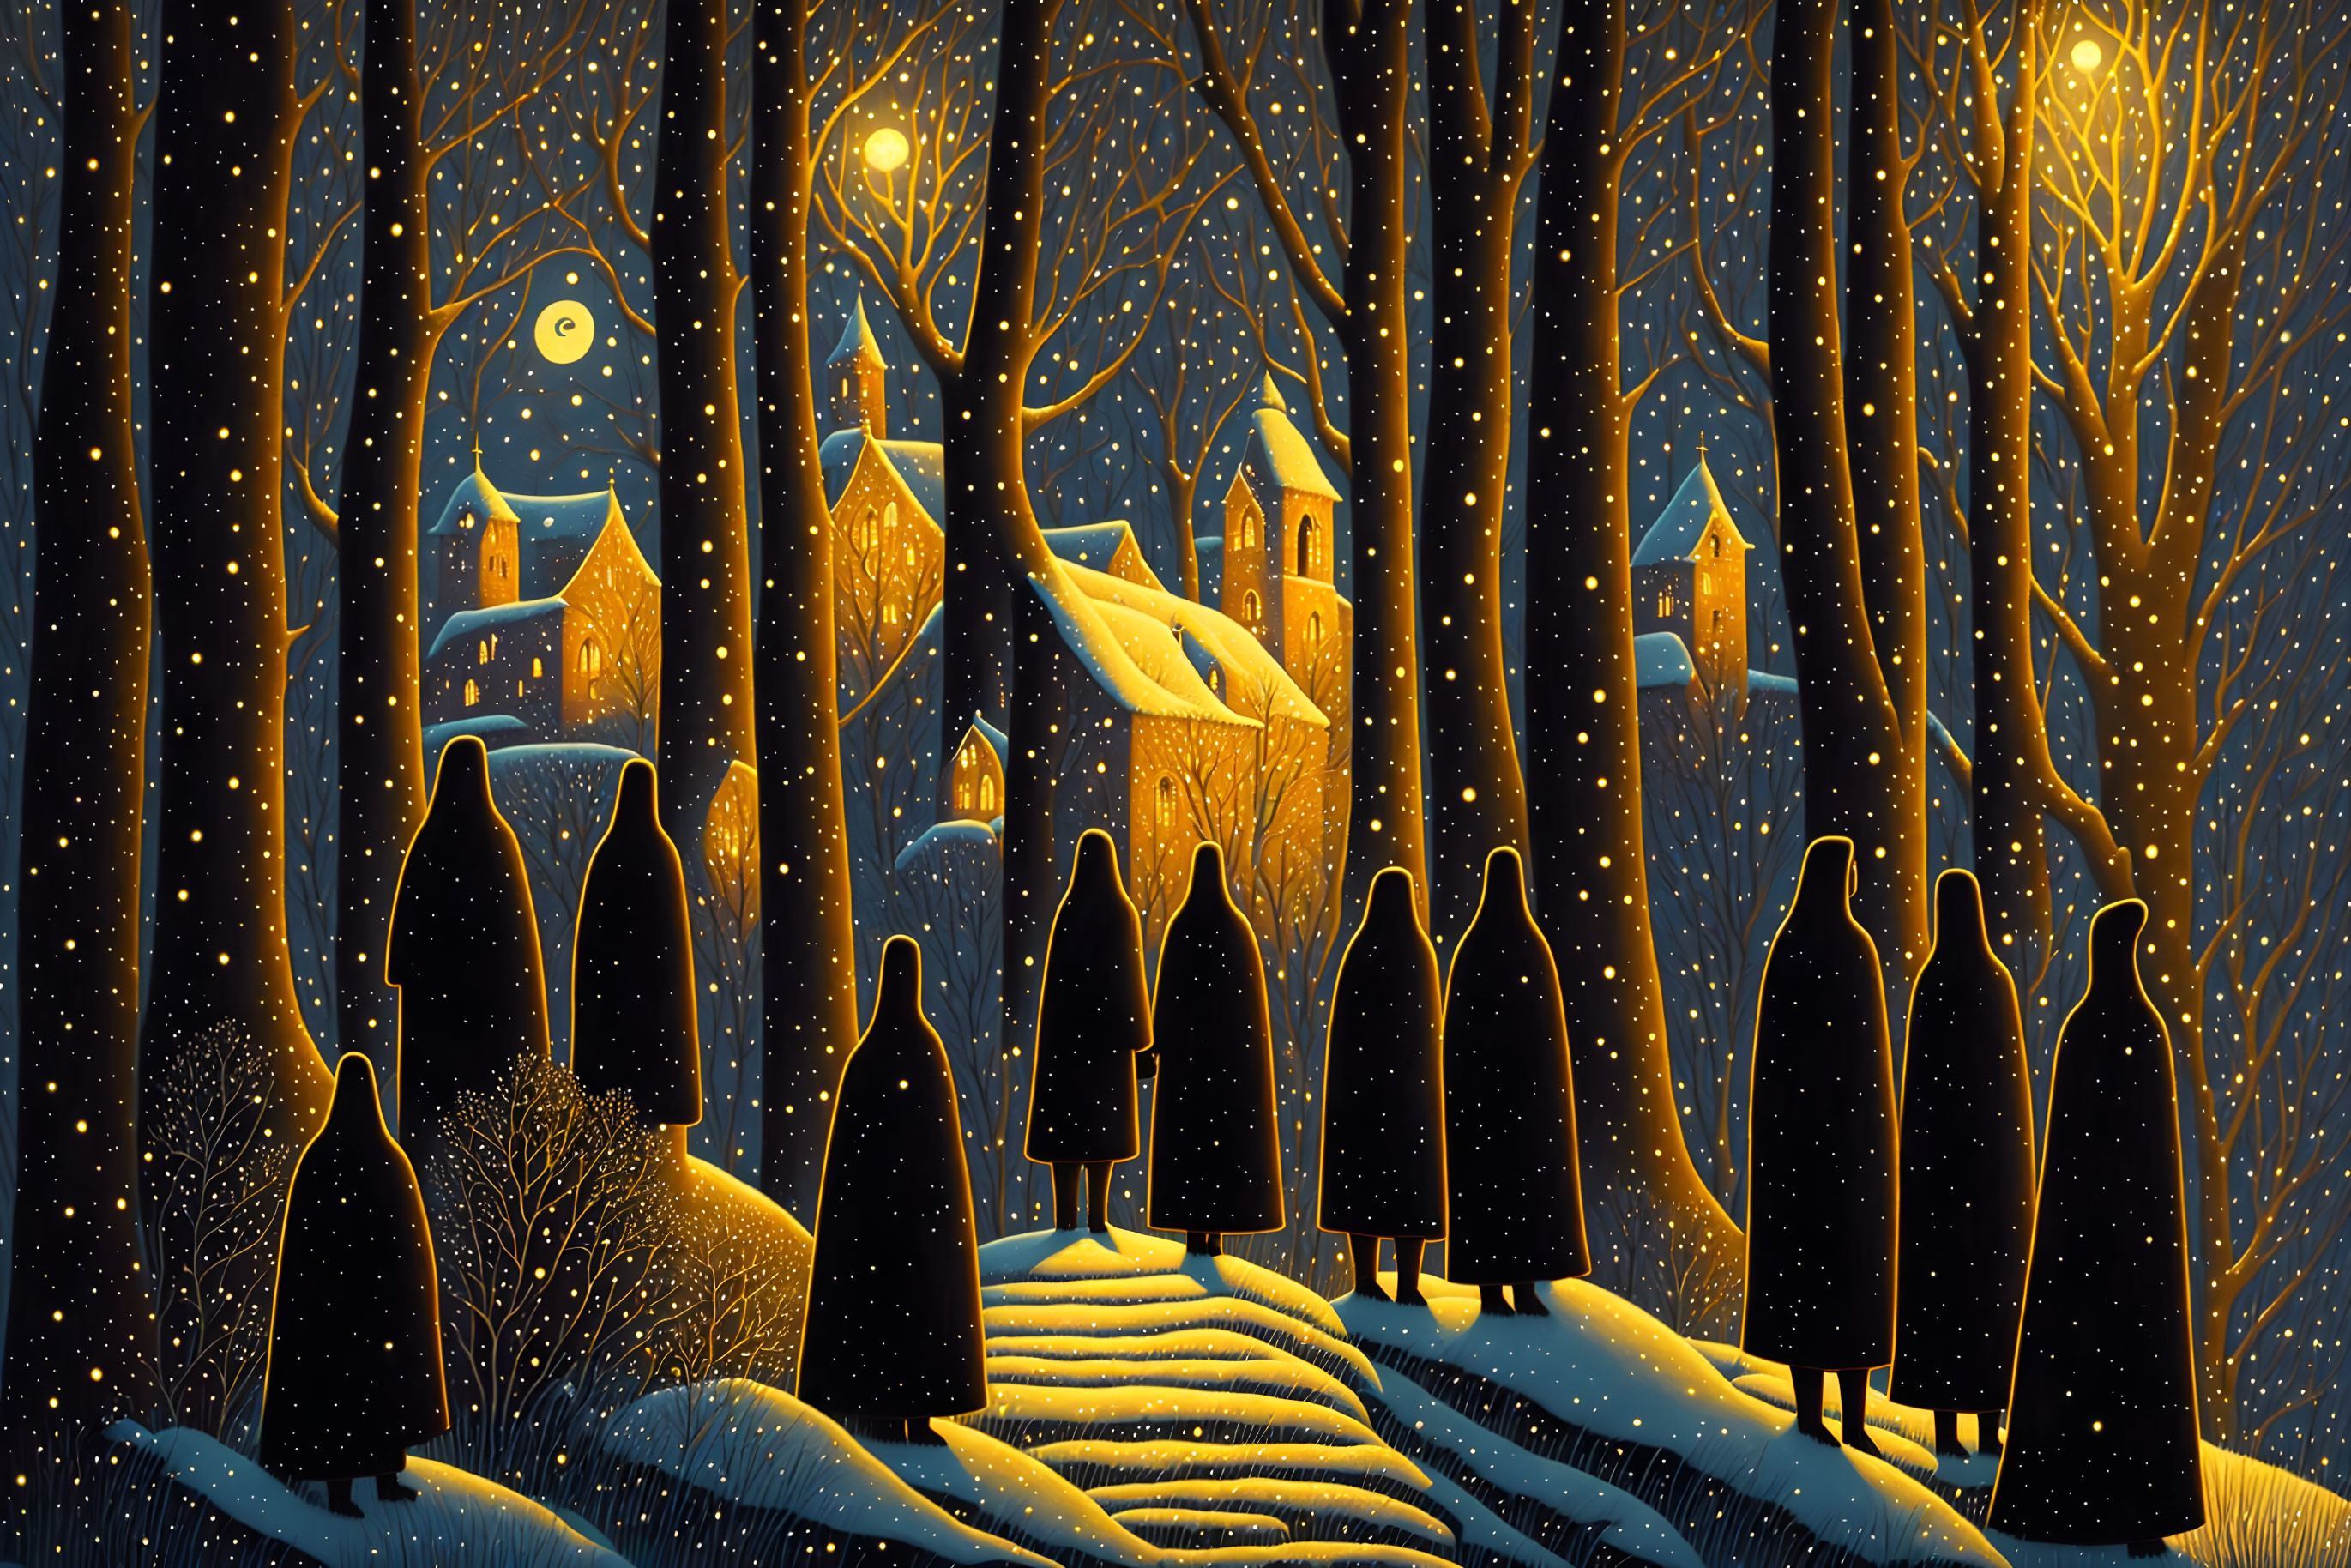 Robed Figures in Snowy Forest with Illuminated Houses at Night